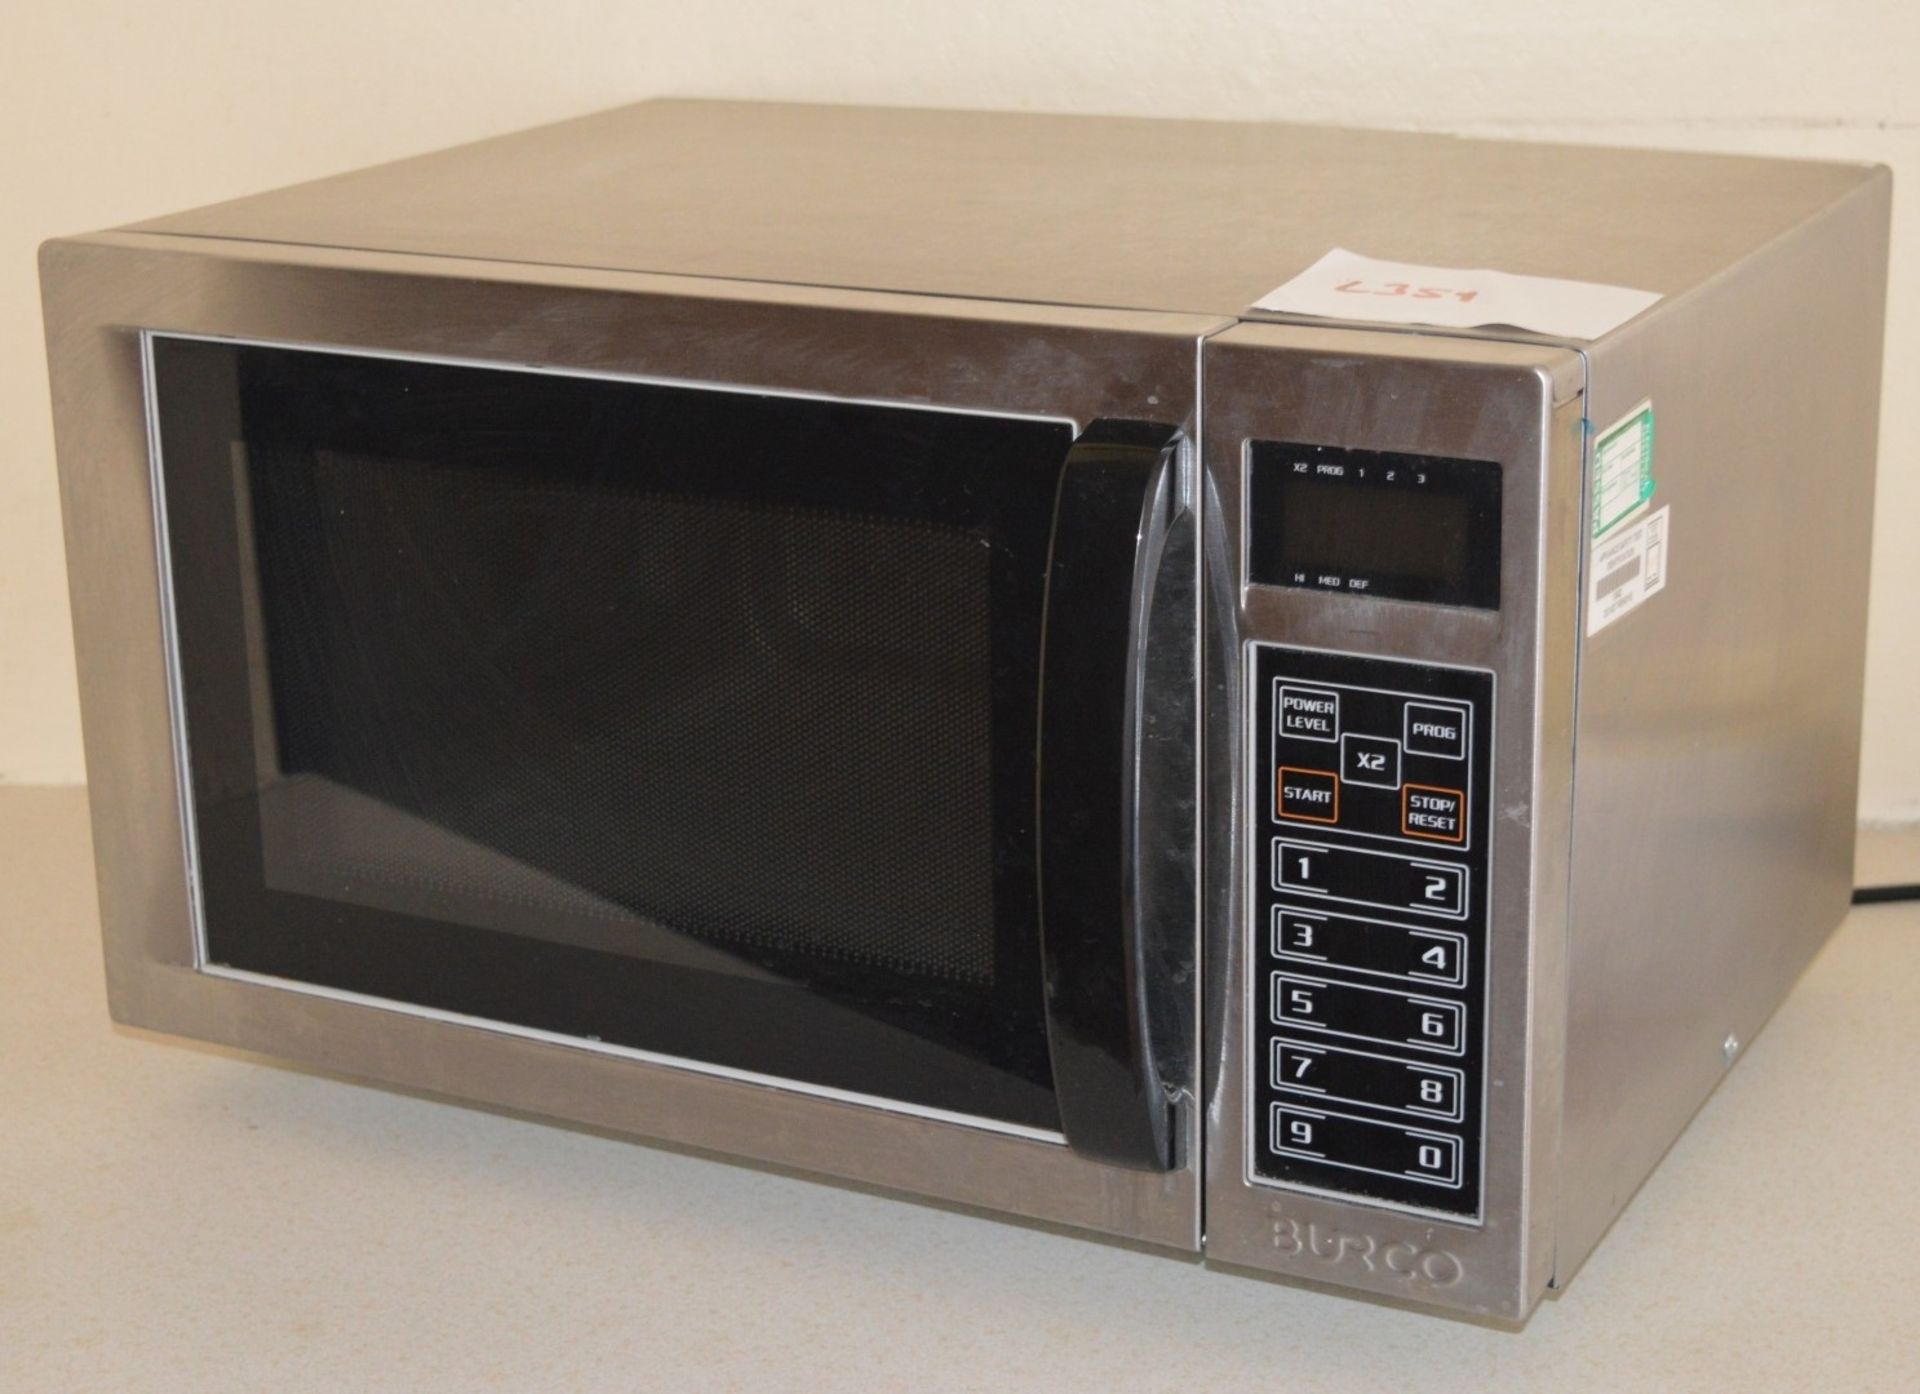 1 x Burco 1000W Commercial Microwave - Model CTMW01 - 25 Litre Capacity - Stainless Steel Finish - 3